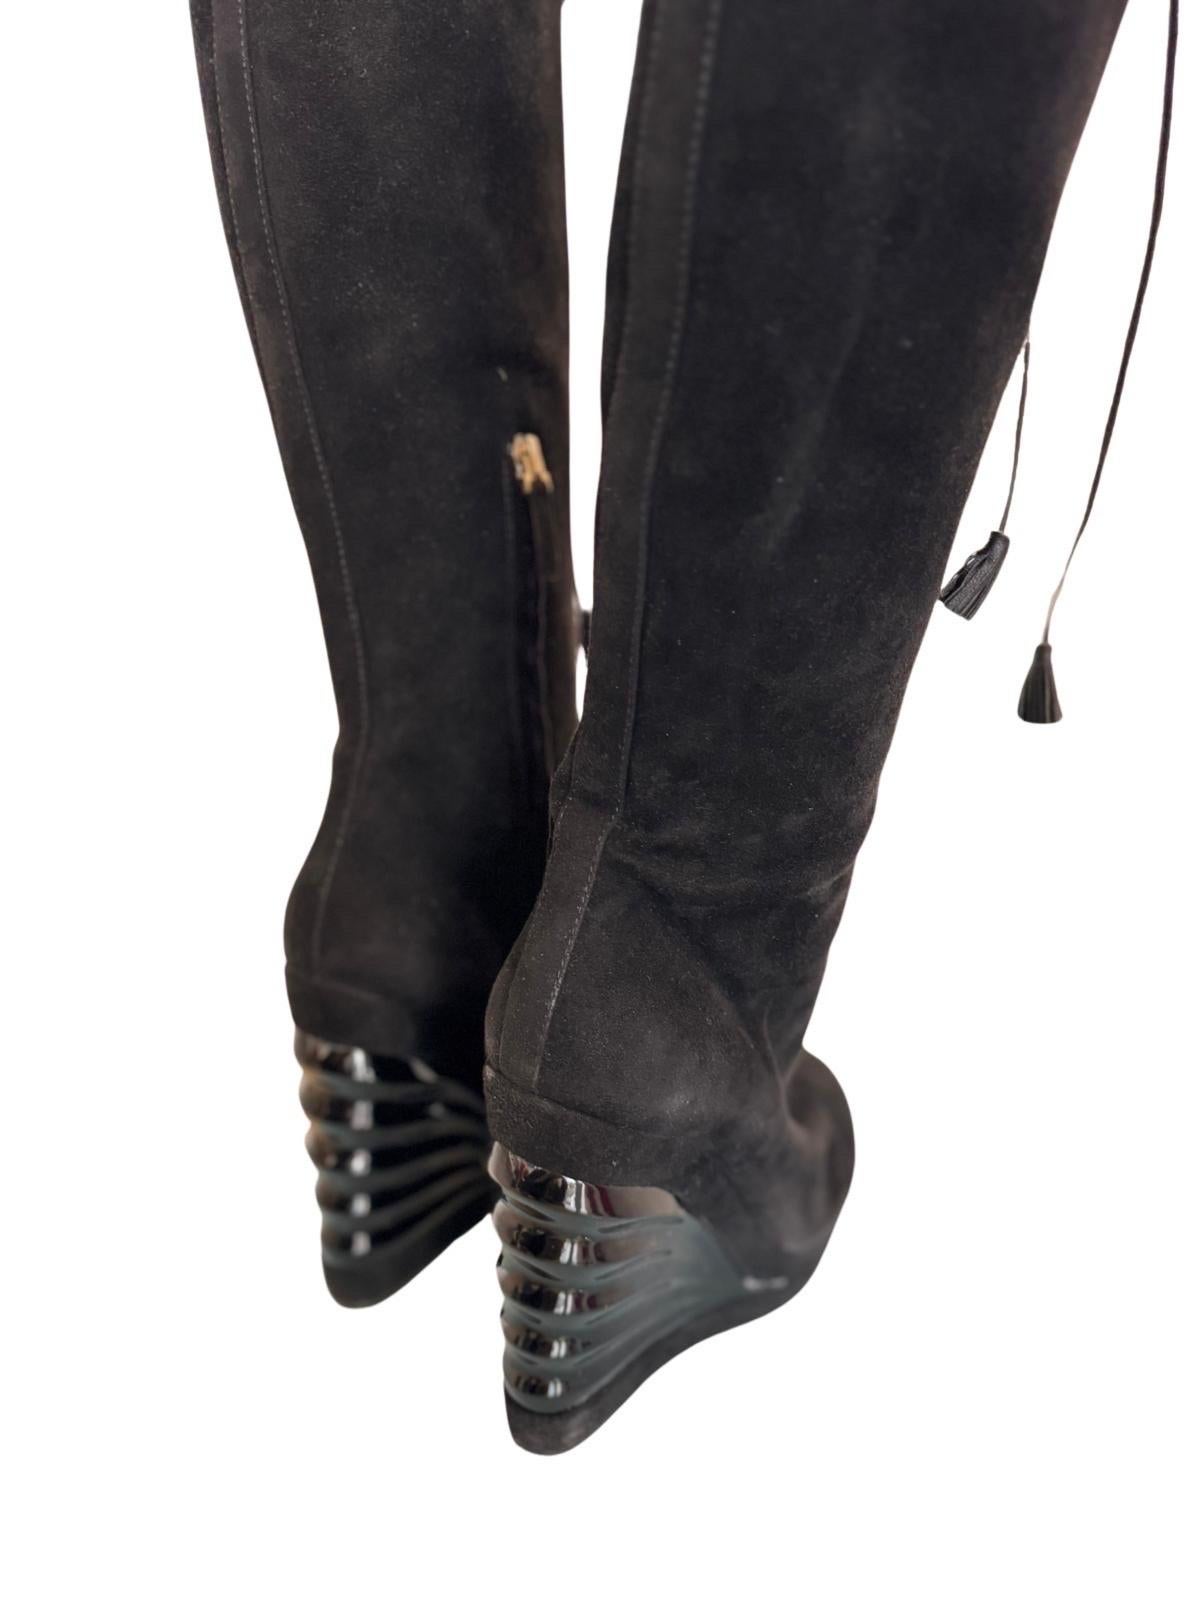 Very cool knee high platform boots from early 00's YSL collection.  In black suede with black leather tie up laces, and a zip up the side.  The platform is in a patent that looks like it fans out and upwards in a space age style.  The platform line